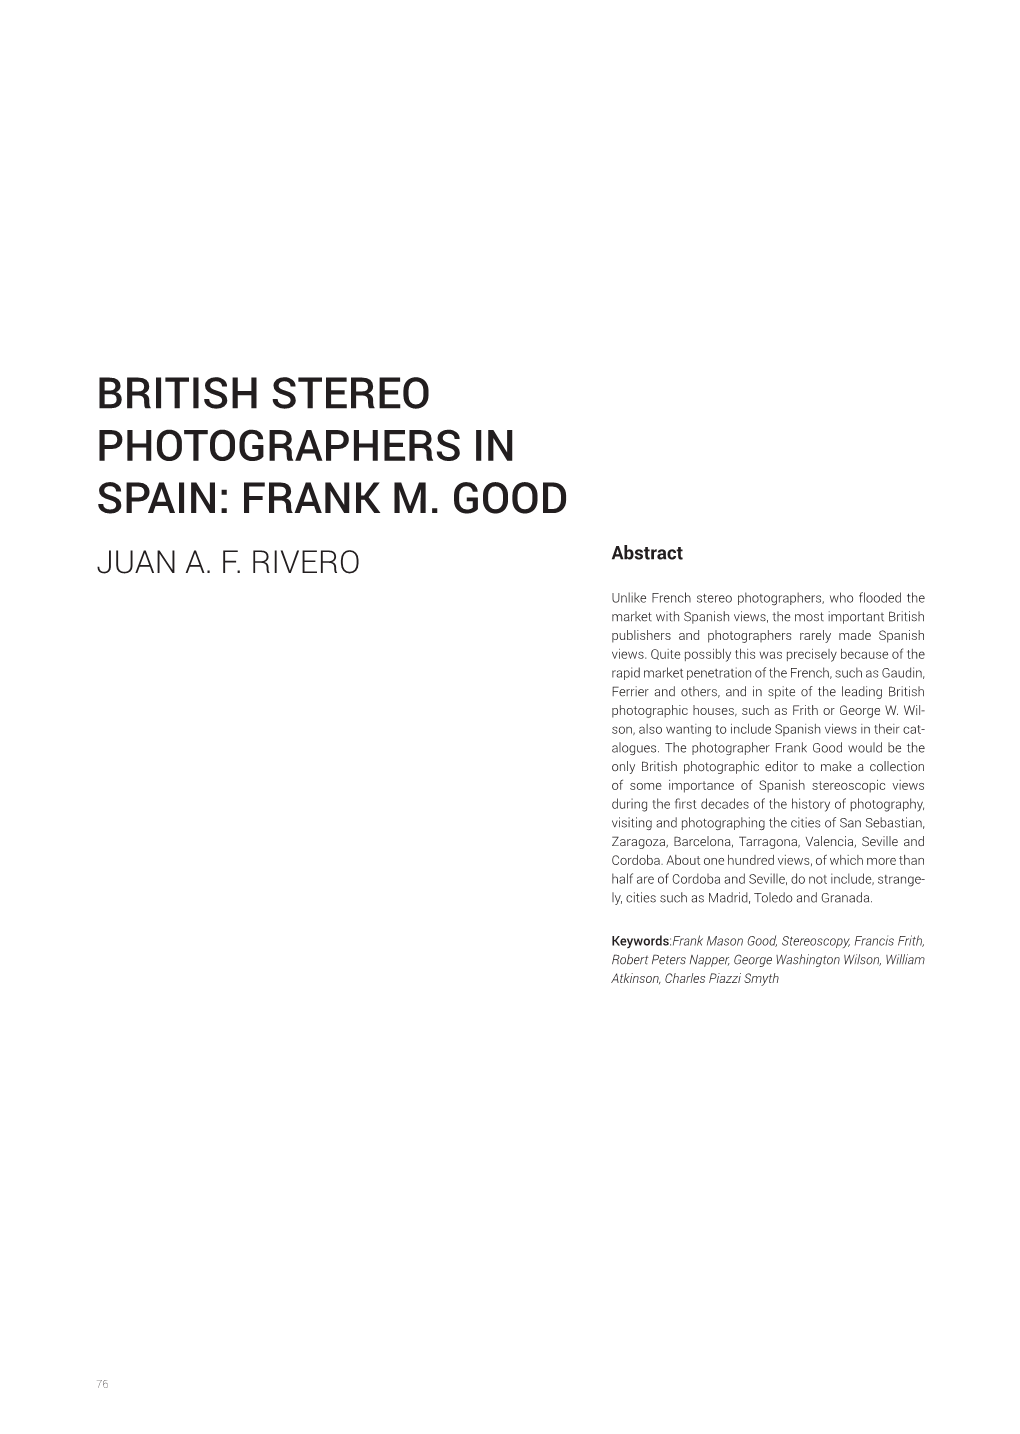 BRITISH Stereo Photographers in SPAIN: FRANK M. GOOD Juan A